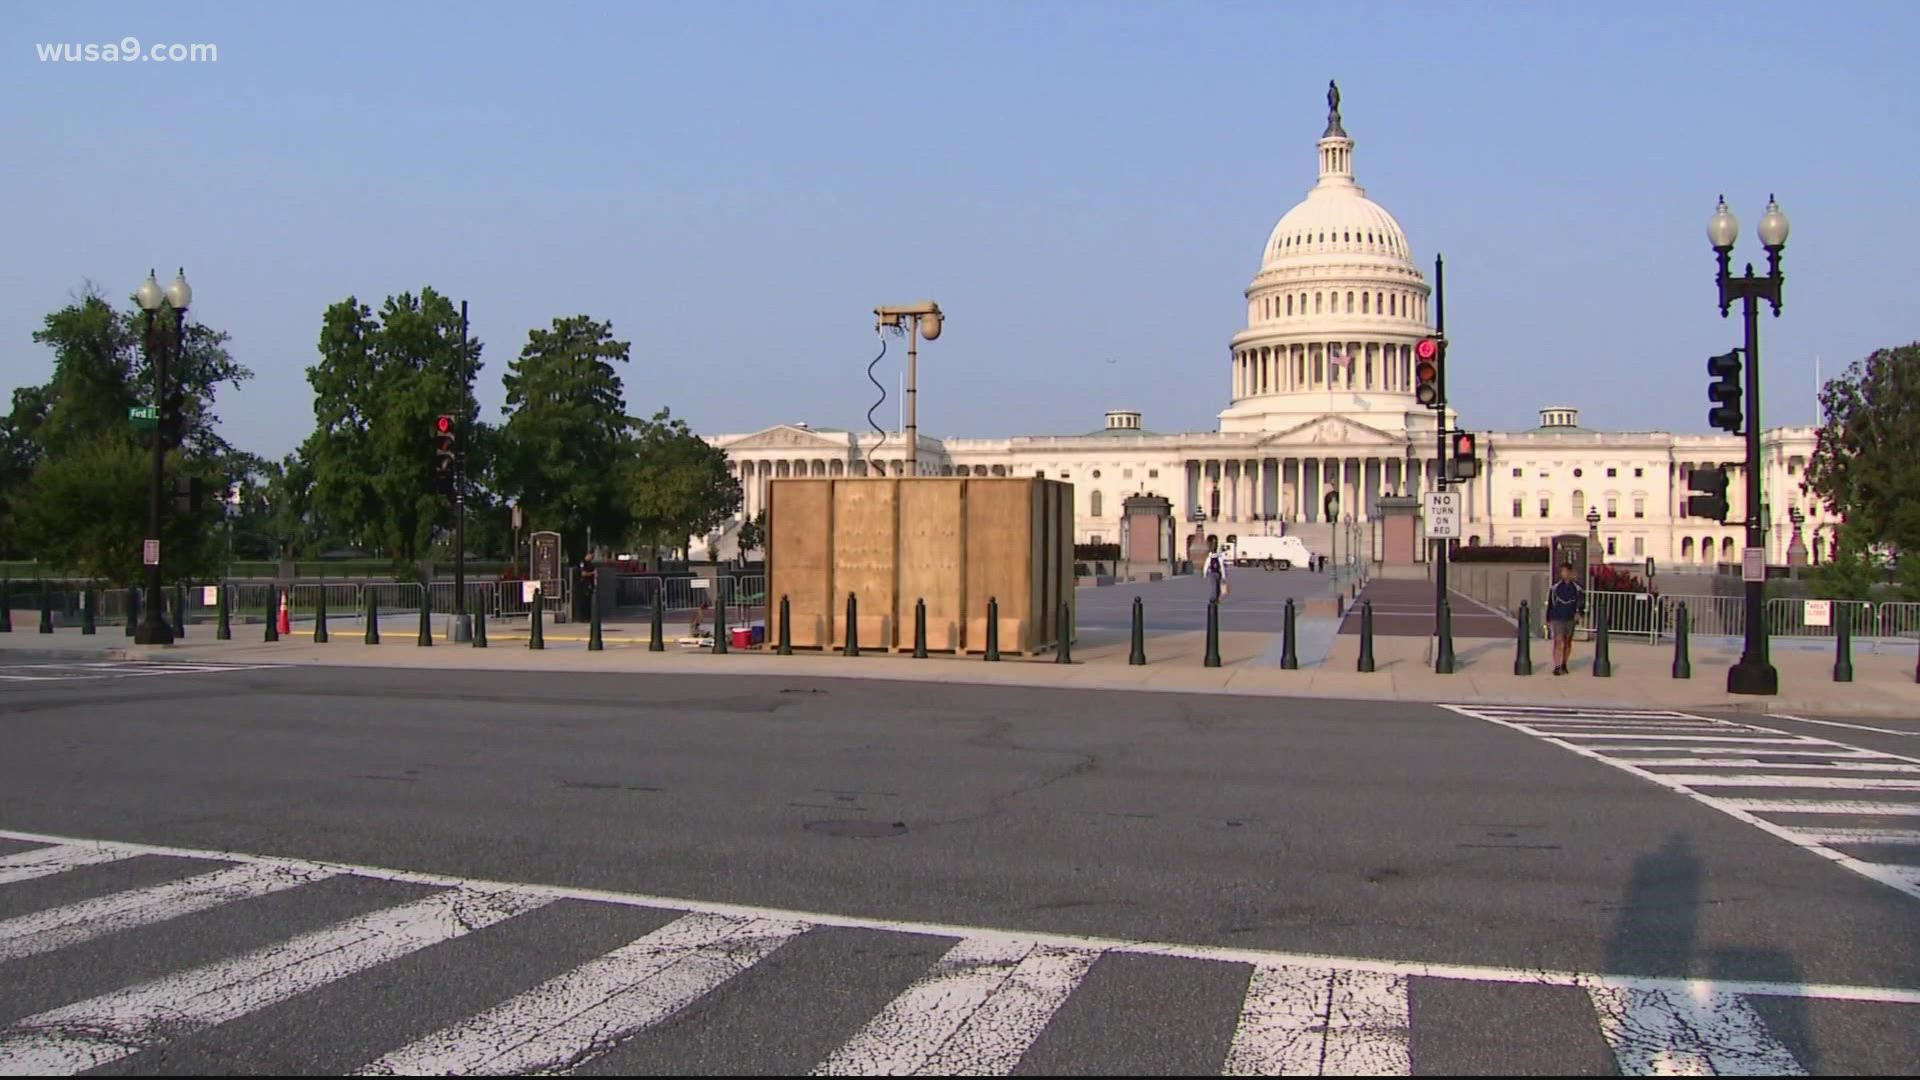 Officers were seen installing several surveillance cameras Monday morning, and a temporary fence will be installed around the Capitol this week.